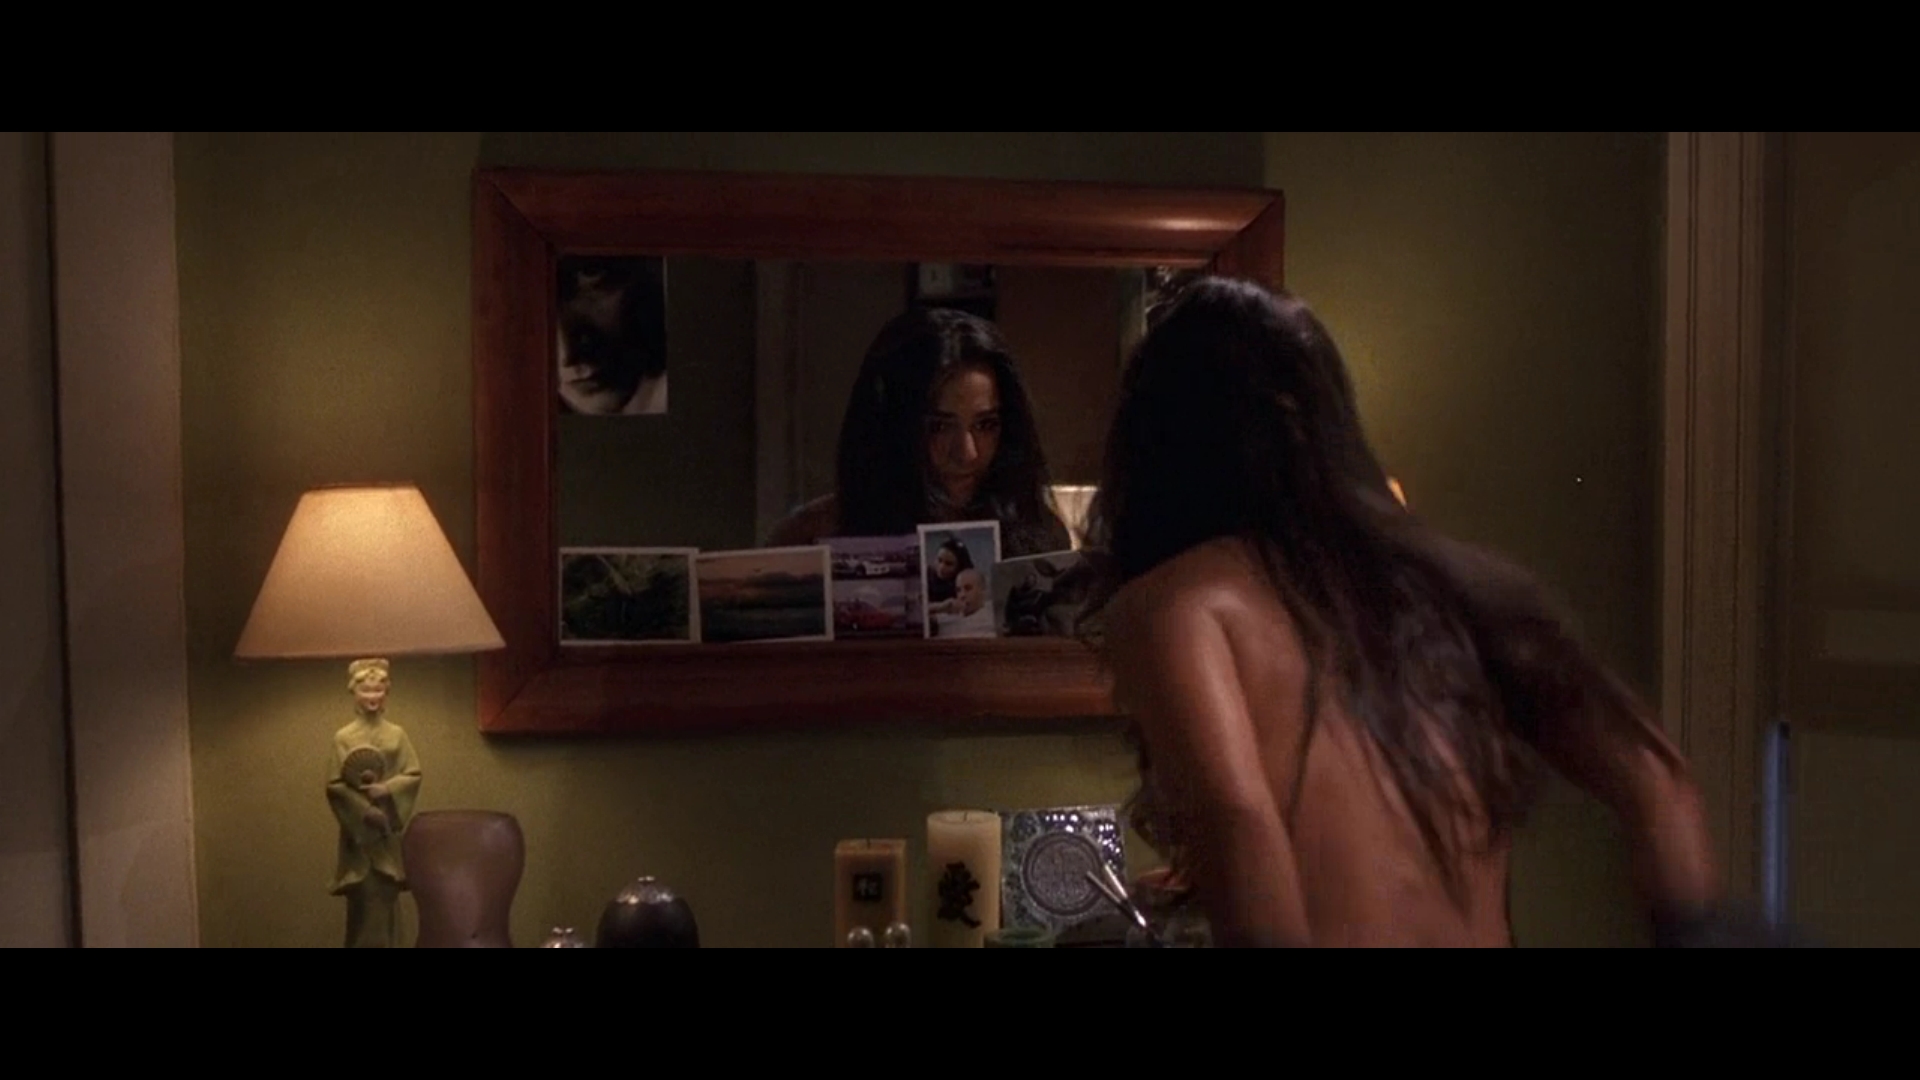 Naked Jordana Brewster In The Fast And The Furious